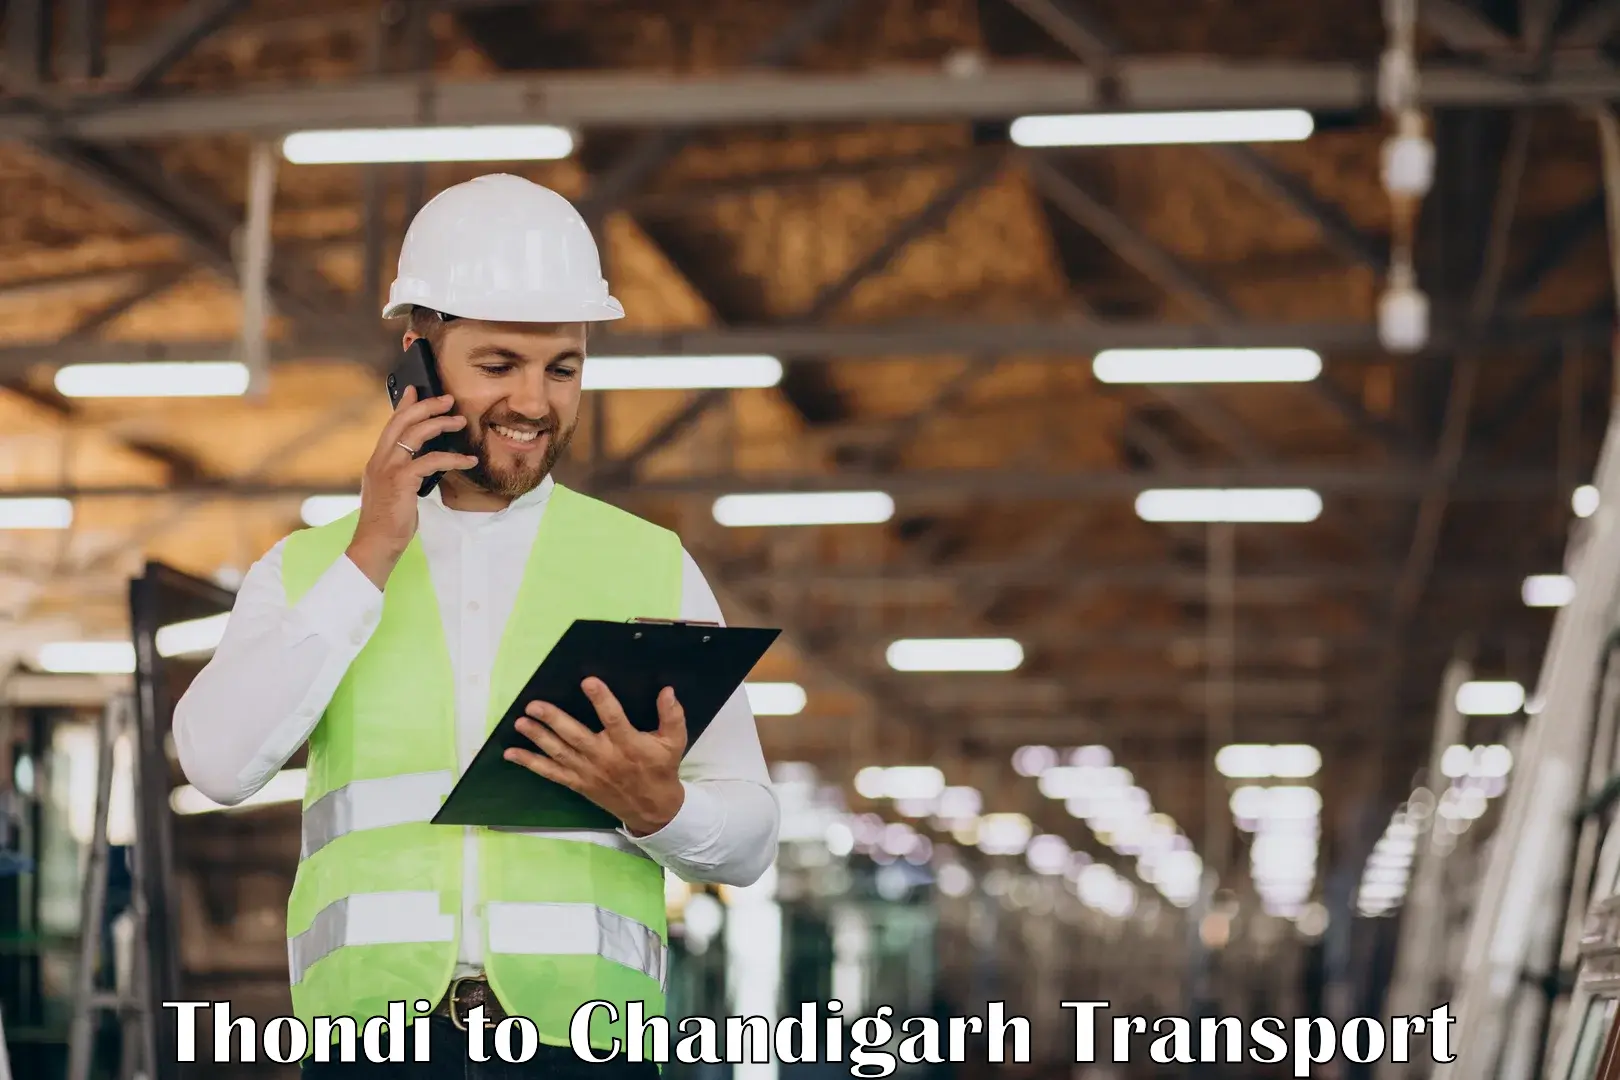 Part load transport service in India Thondi to Chandigarh